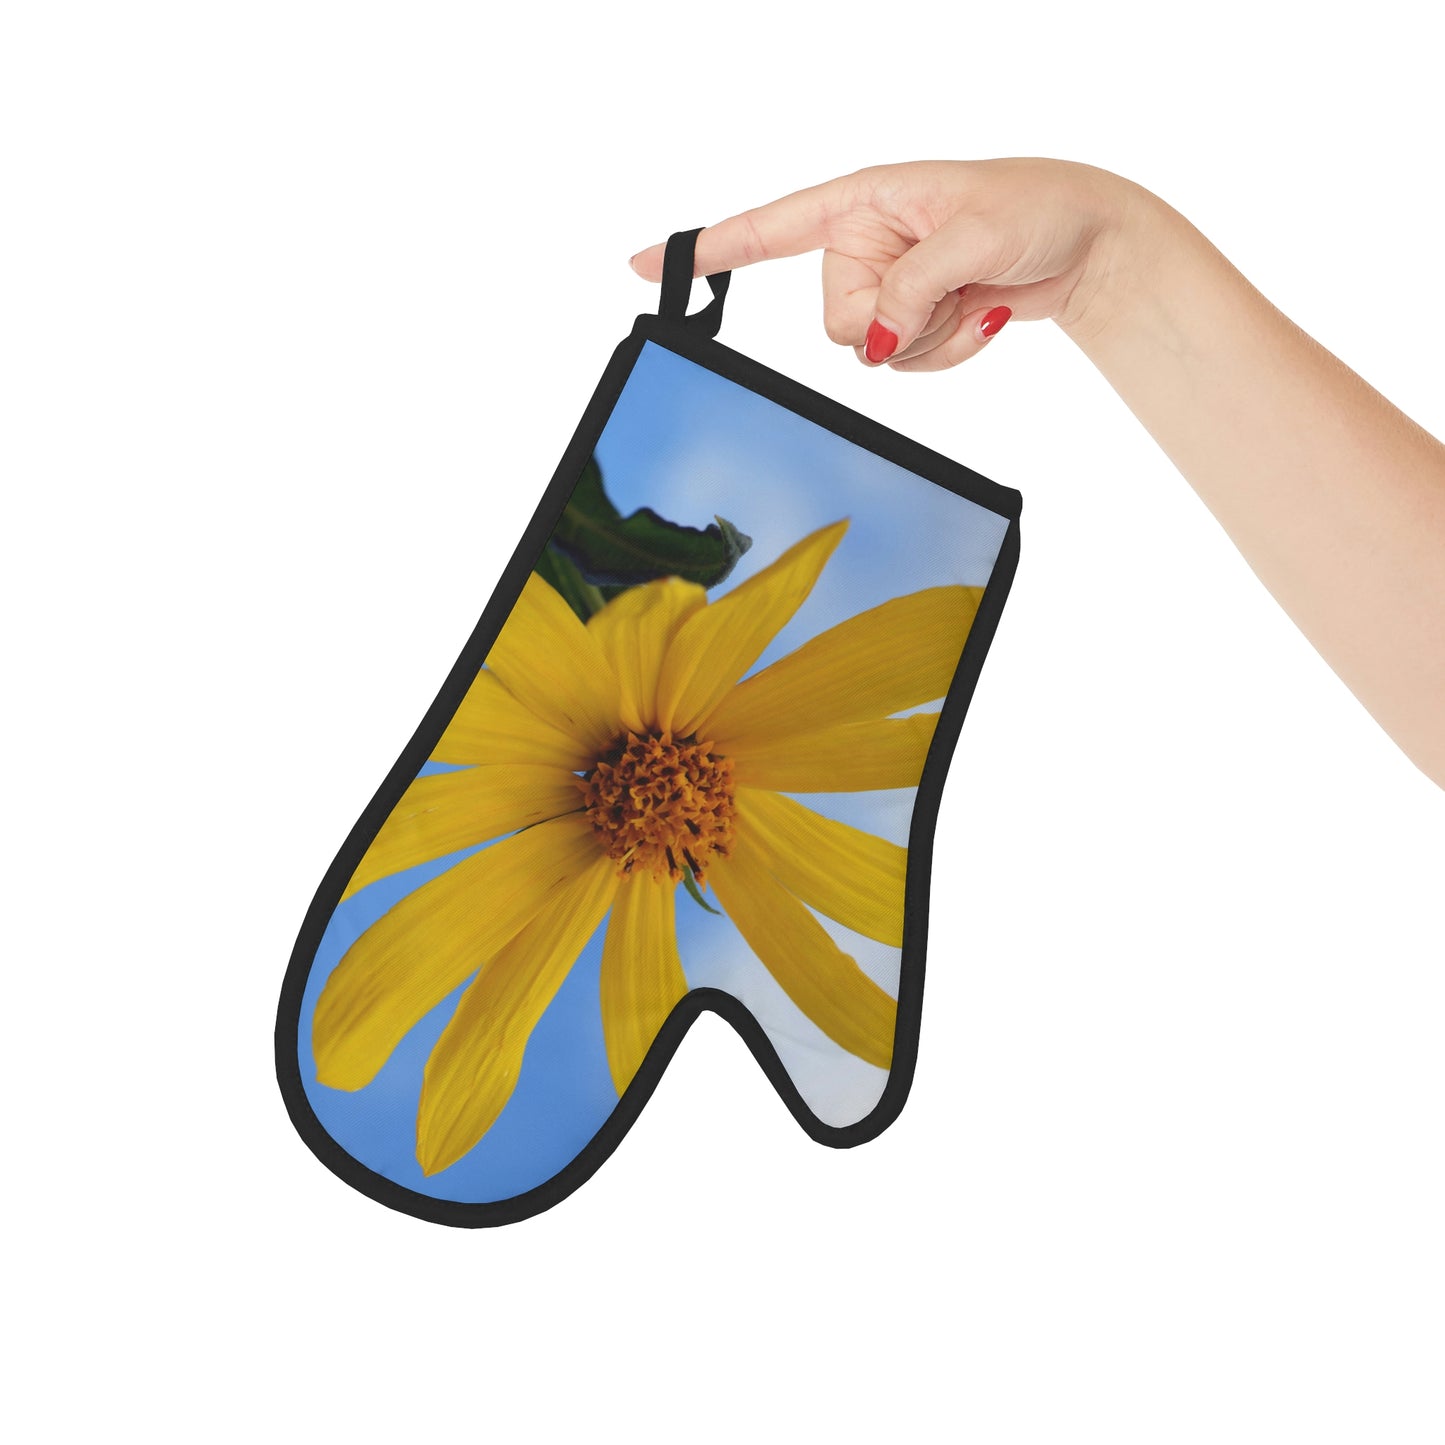 Flowers 31 Oven Glove